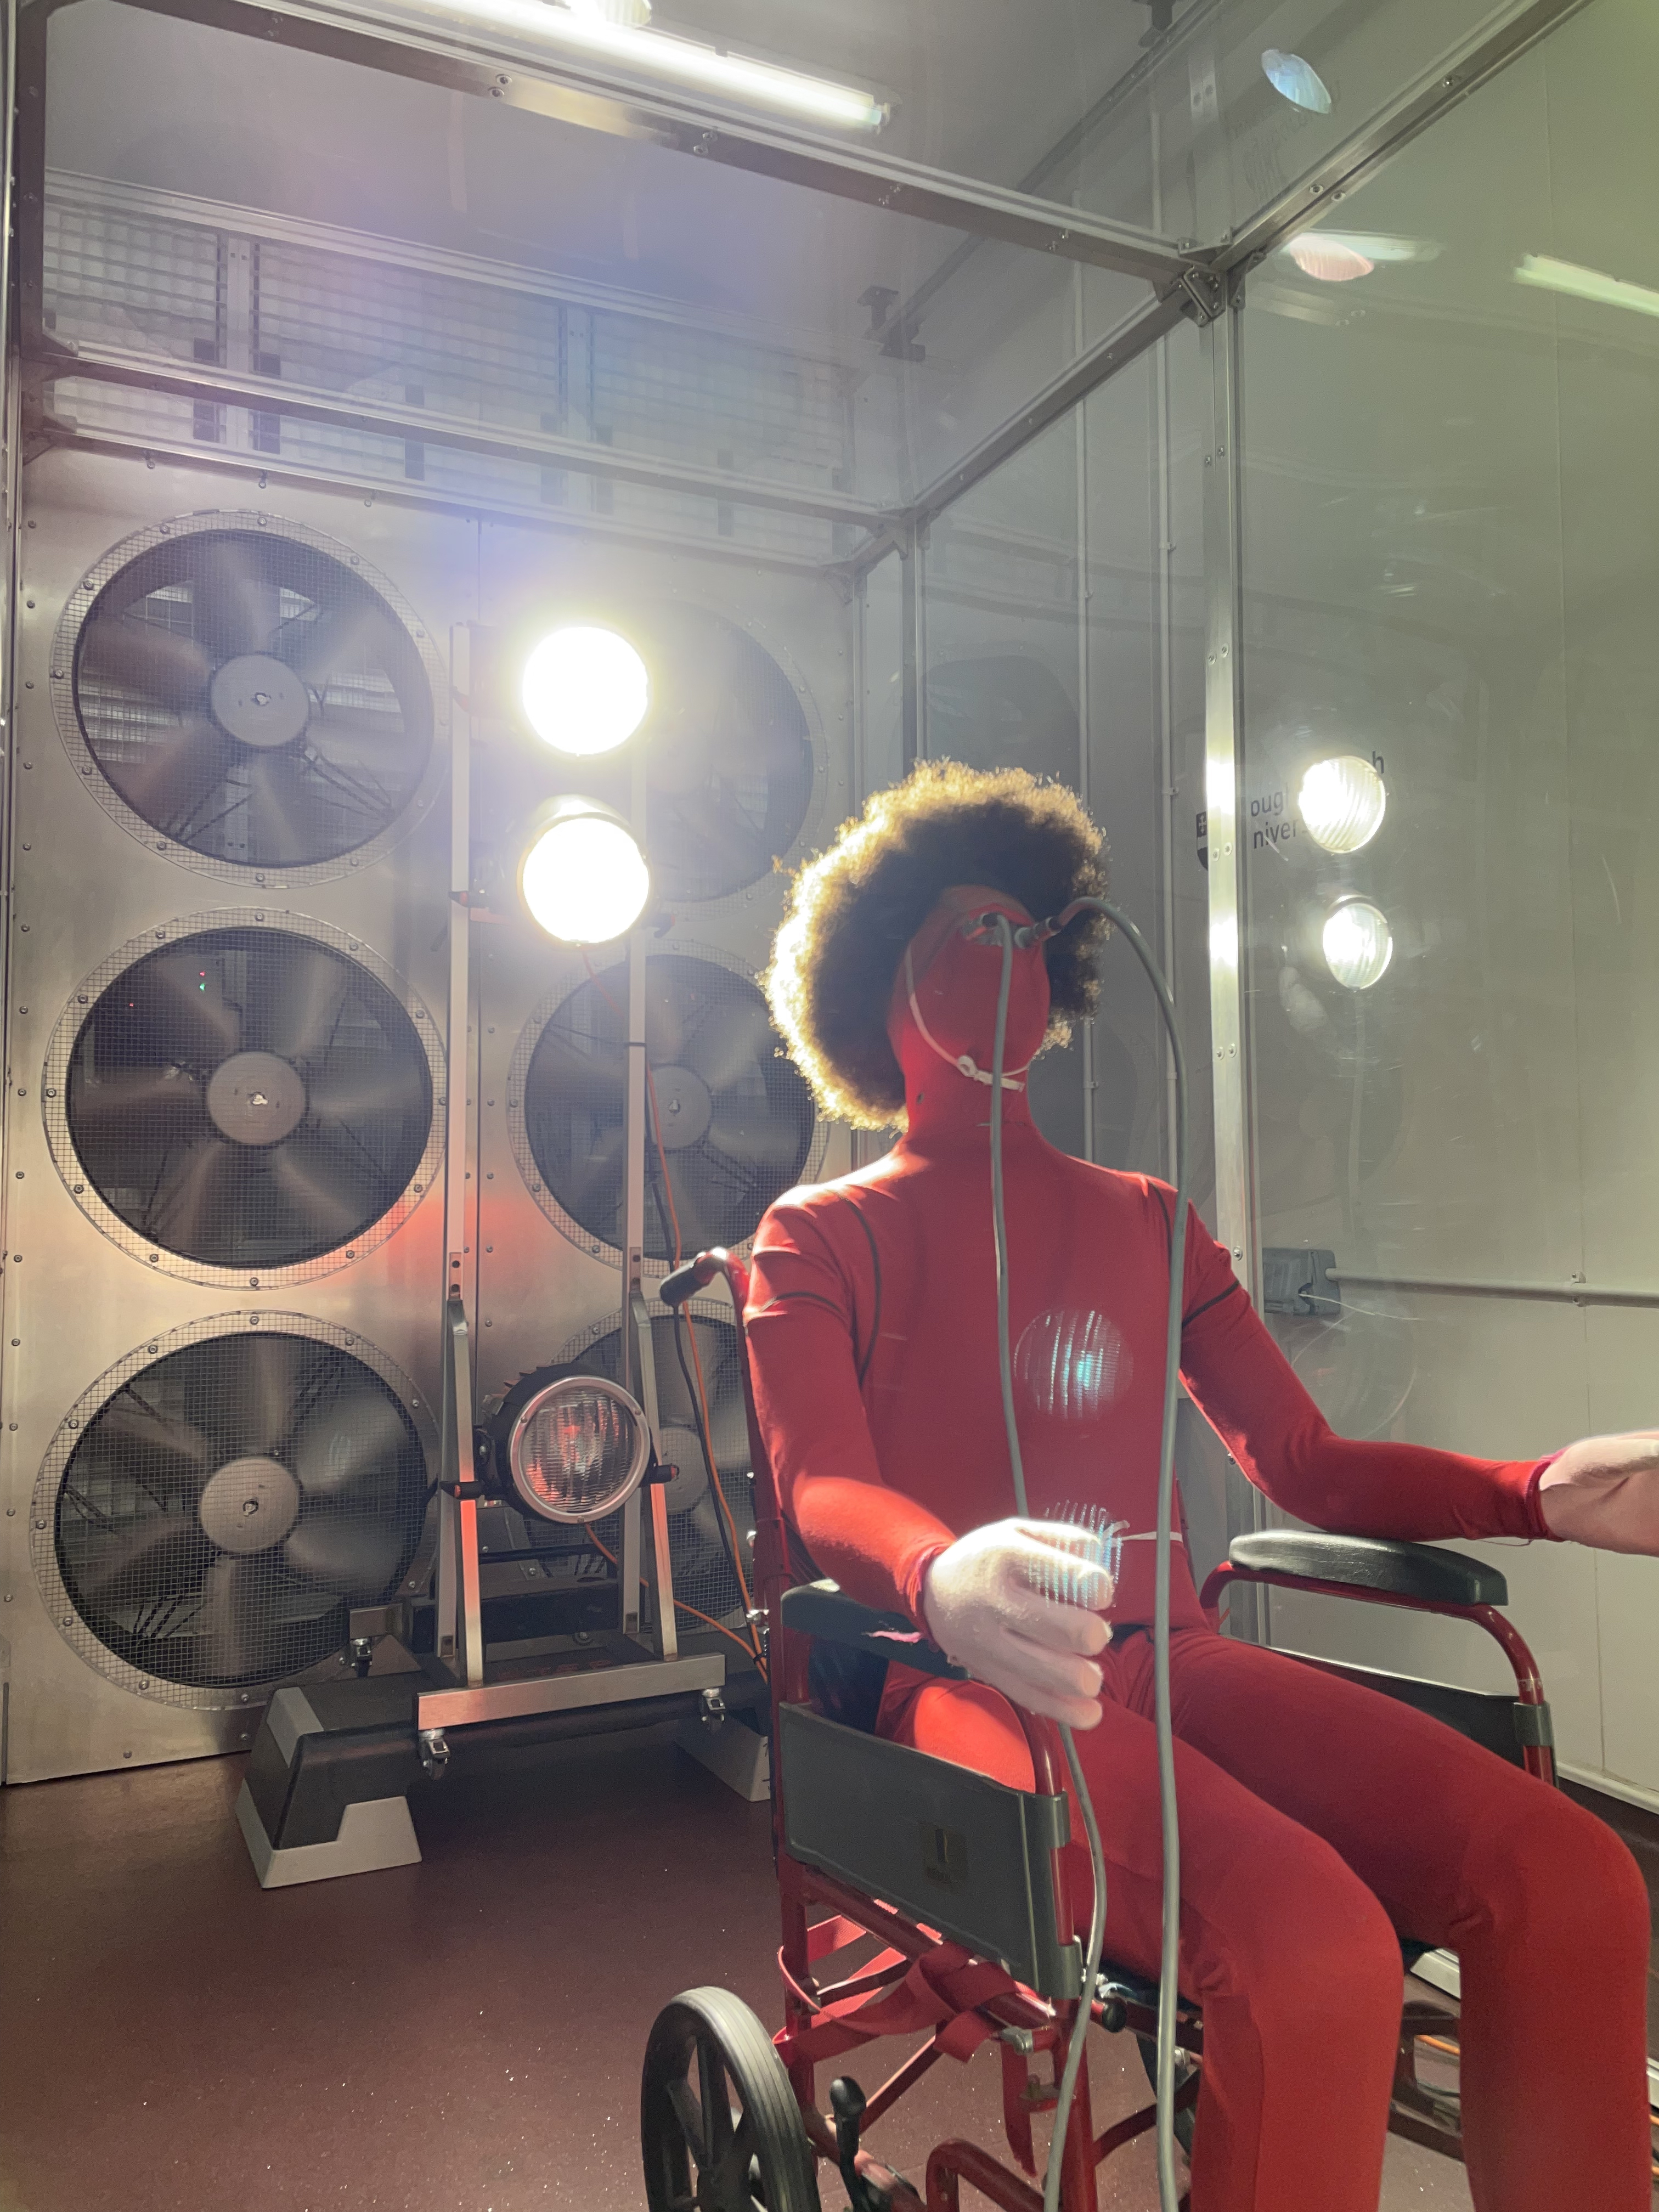 A manekin wearing all red and a curly afro wig sits in a wheelchair facing away from a wall of fans. Wires are plugged into its eye sockets. 